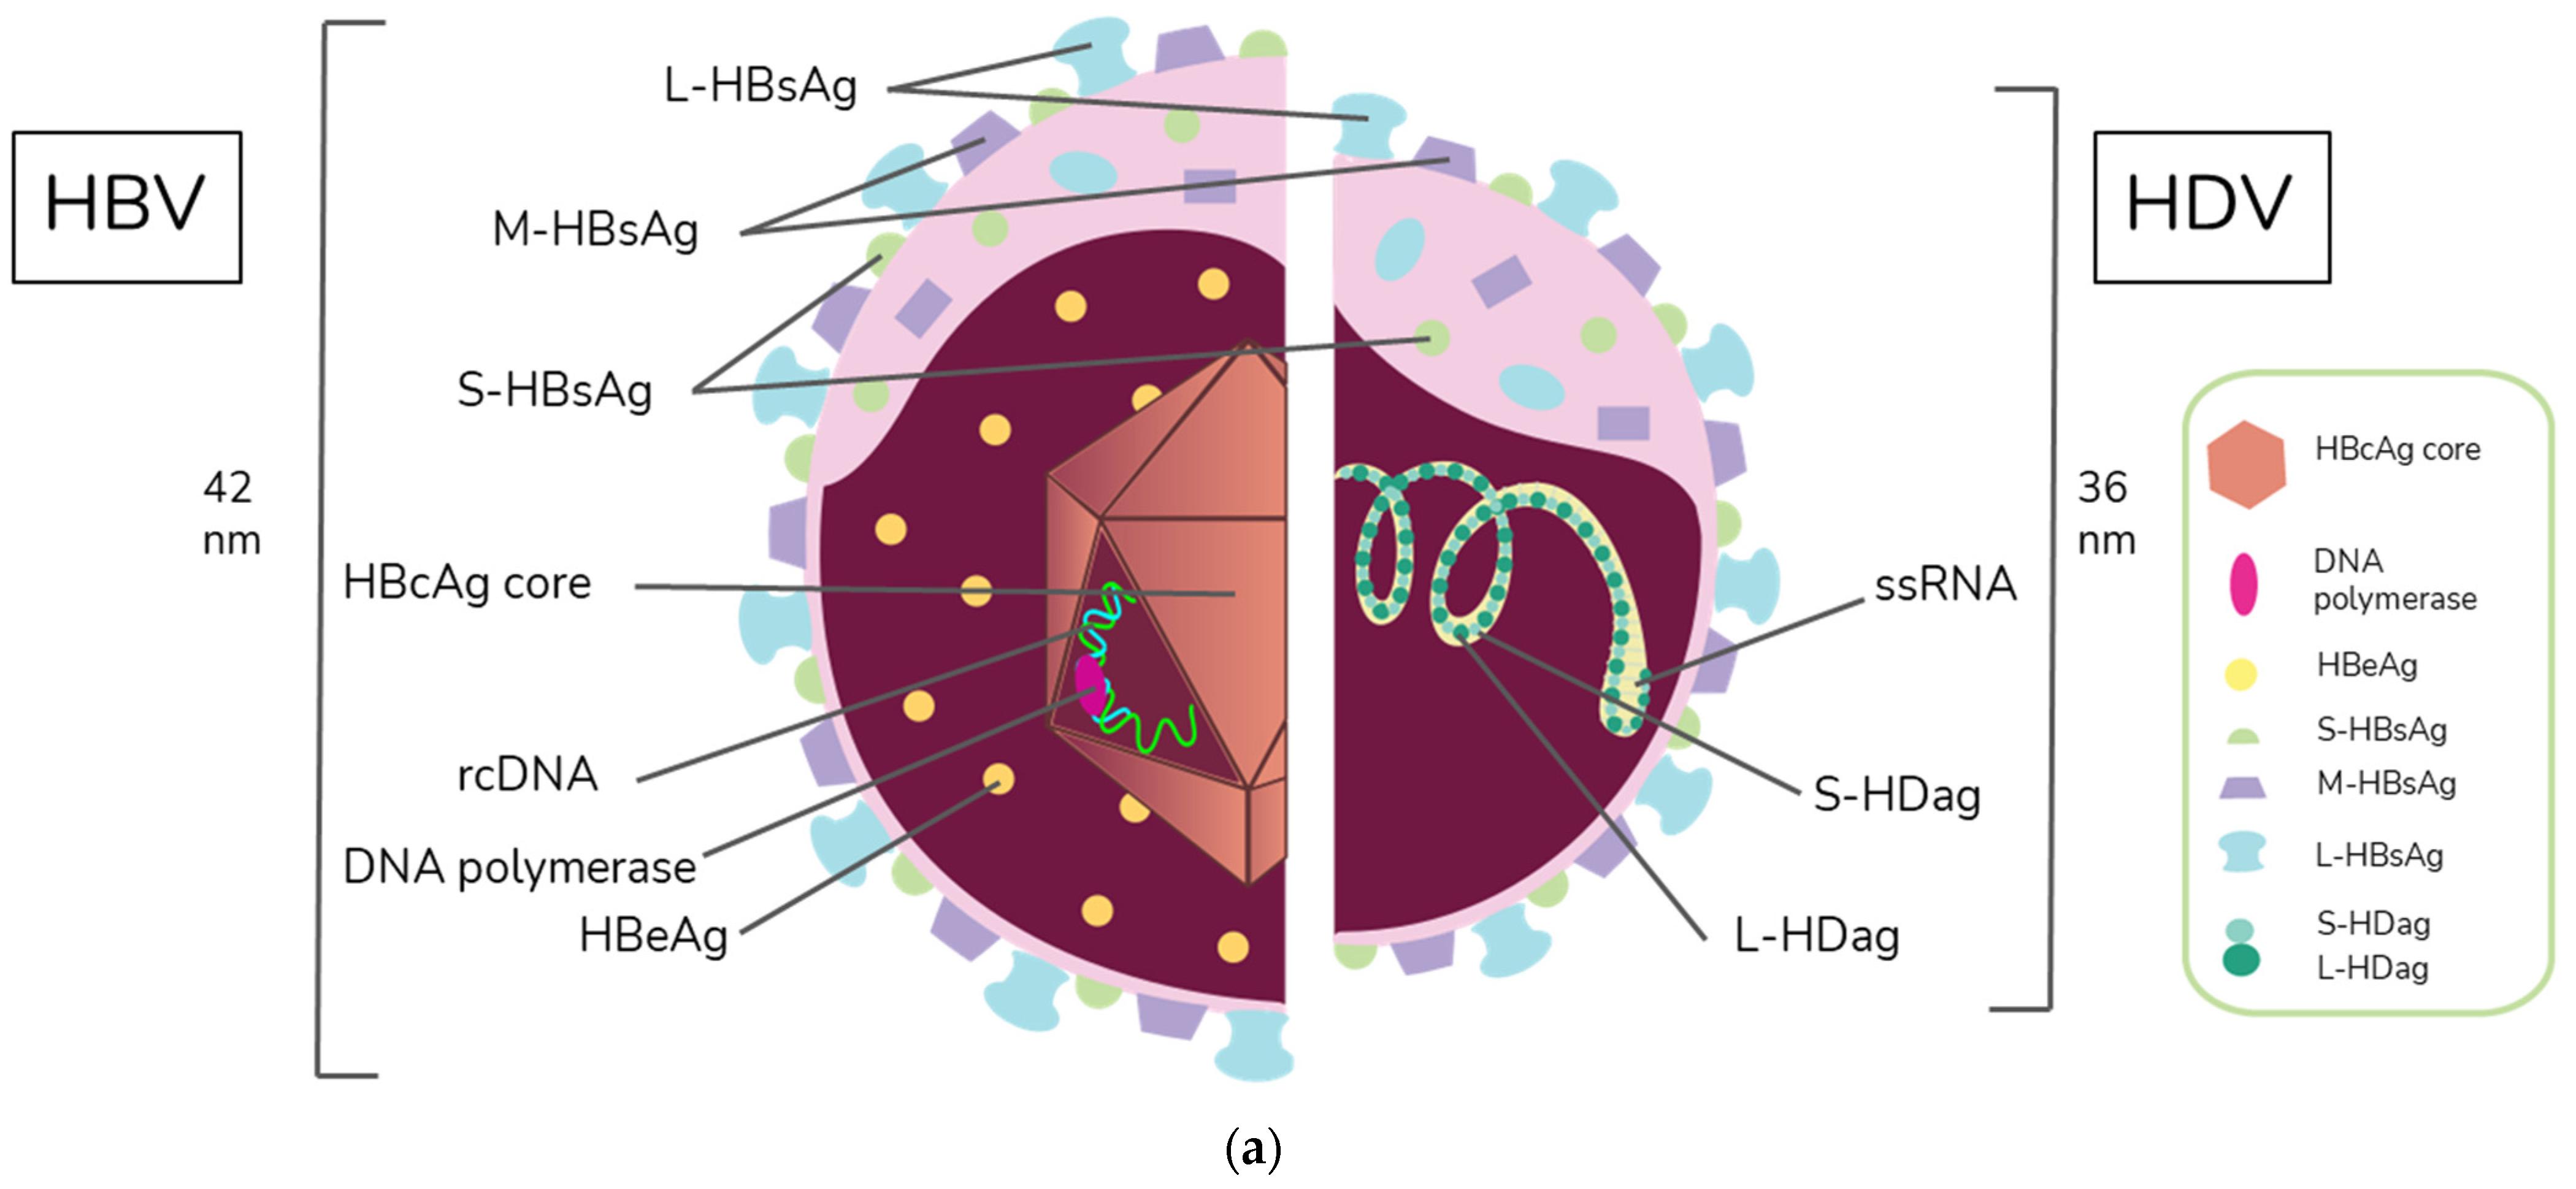 IJMS | Free Focus an with Comprehensive | Immunological Viruses: A B Full-Text Update Hepatitis D and Hepatitis